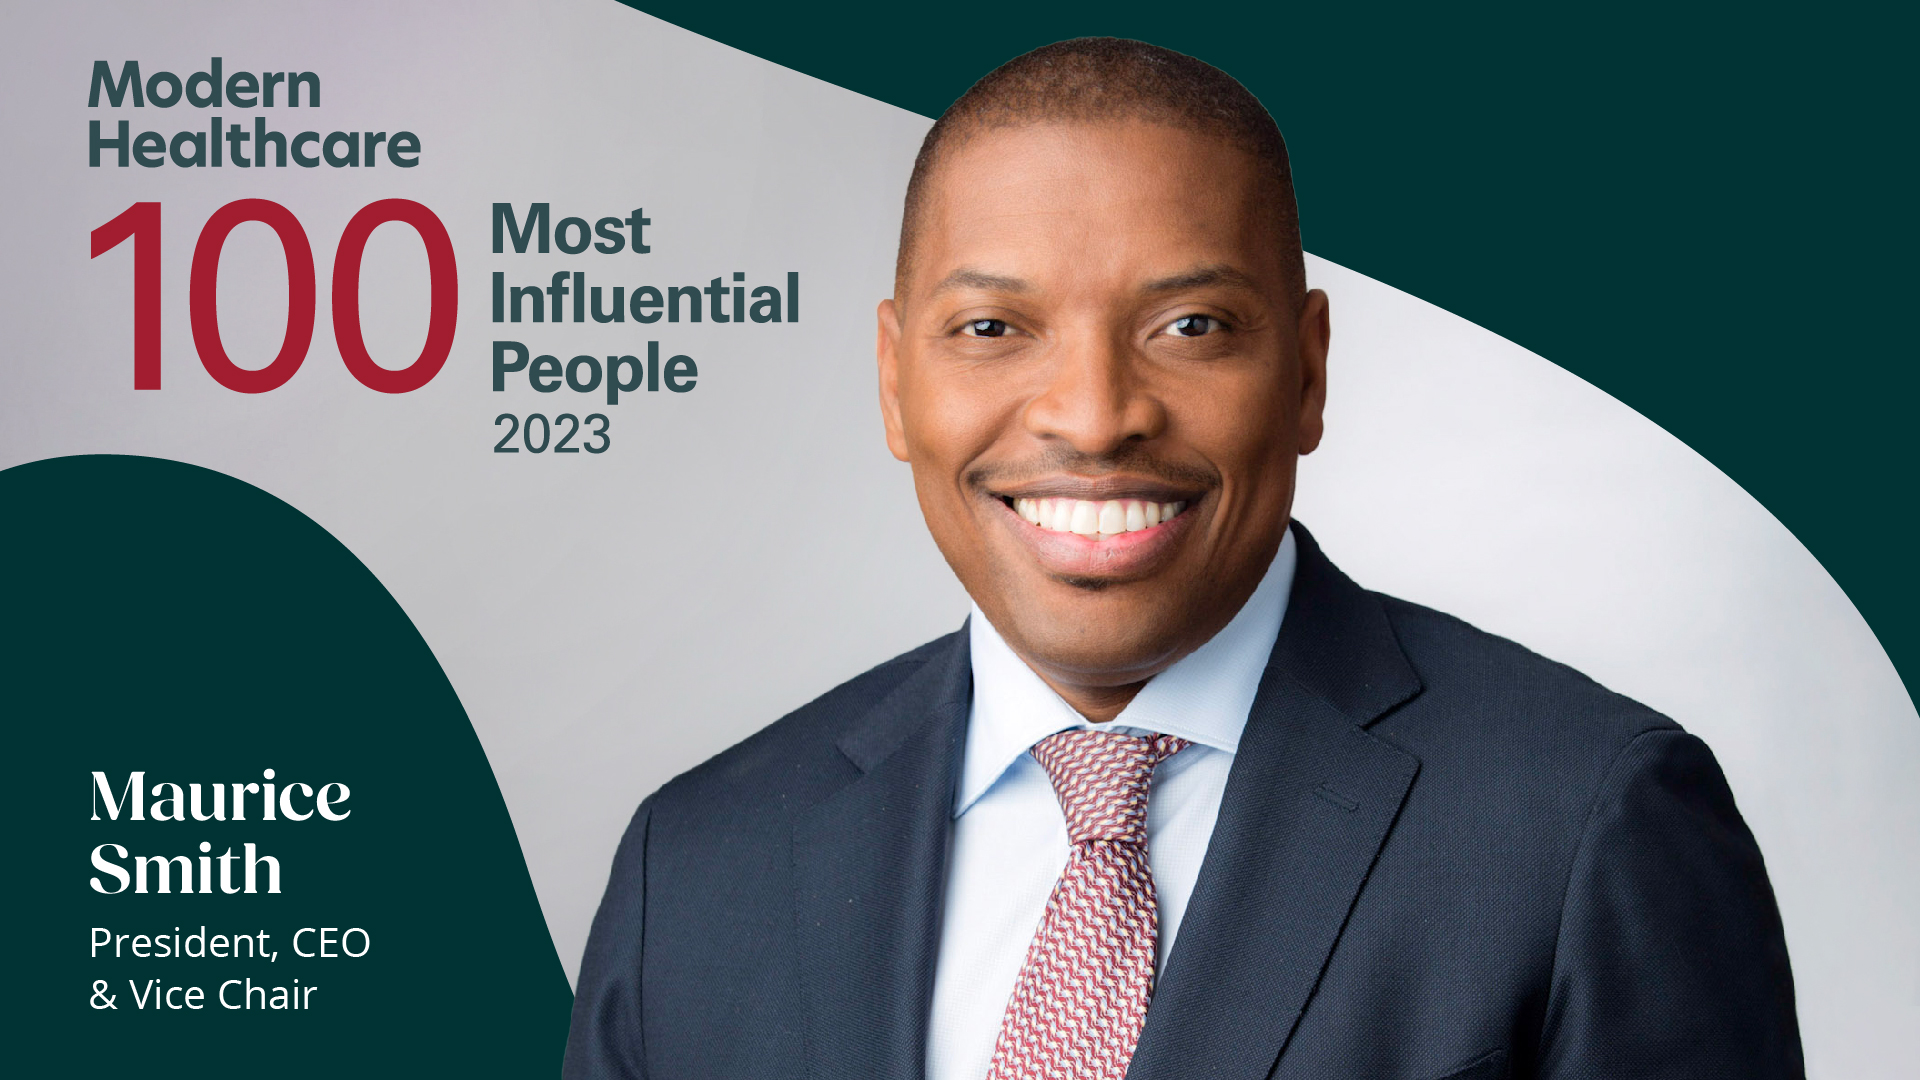 HCSC CEO Maurice Smith portrait with logo of 100 Most Influential People in Healthcare